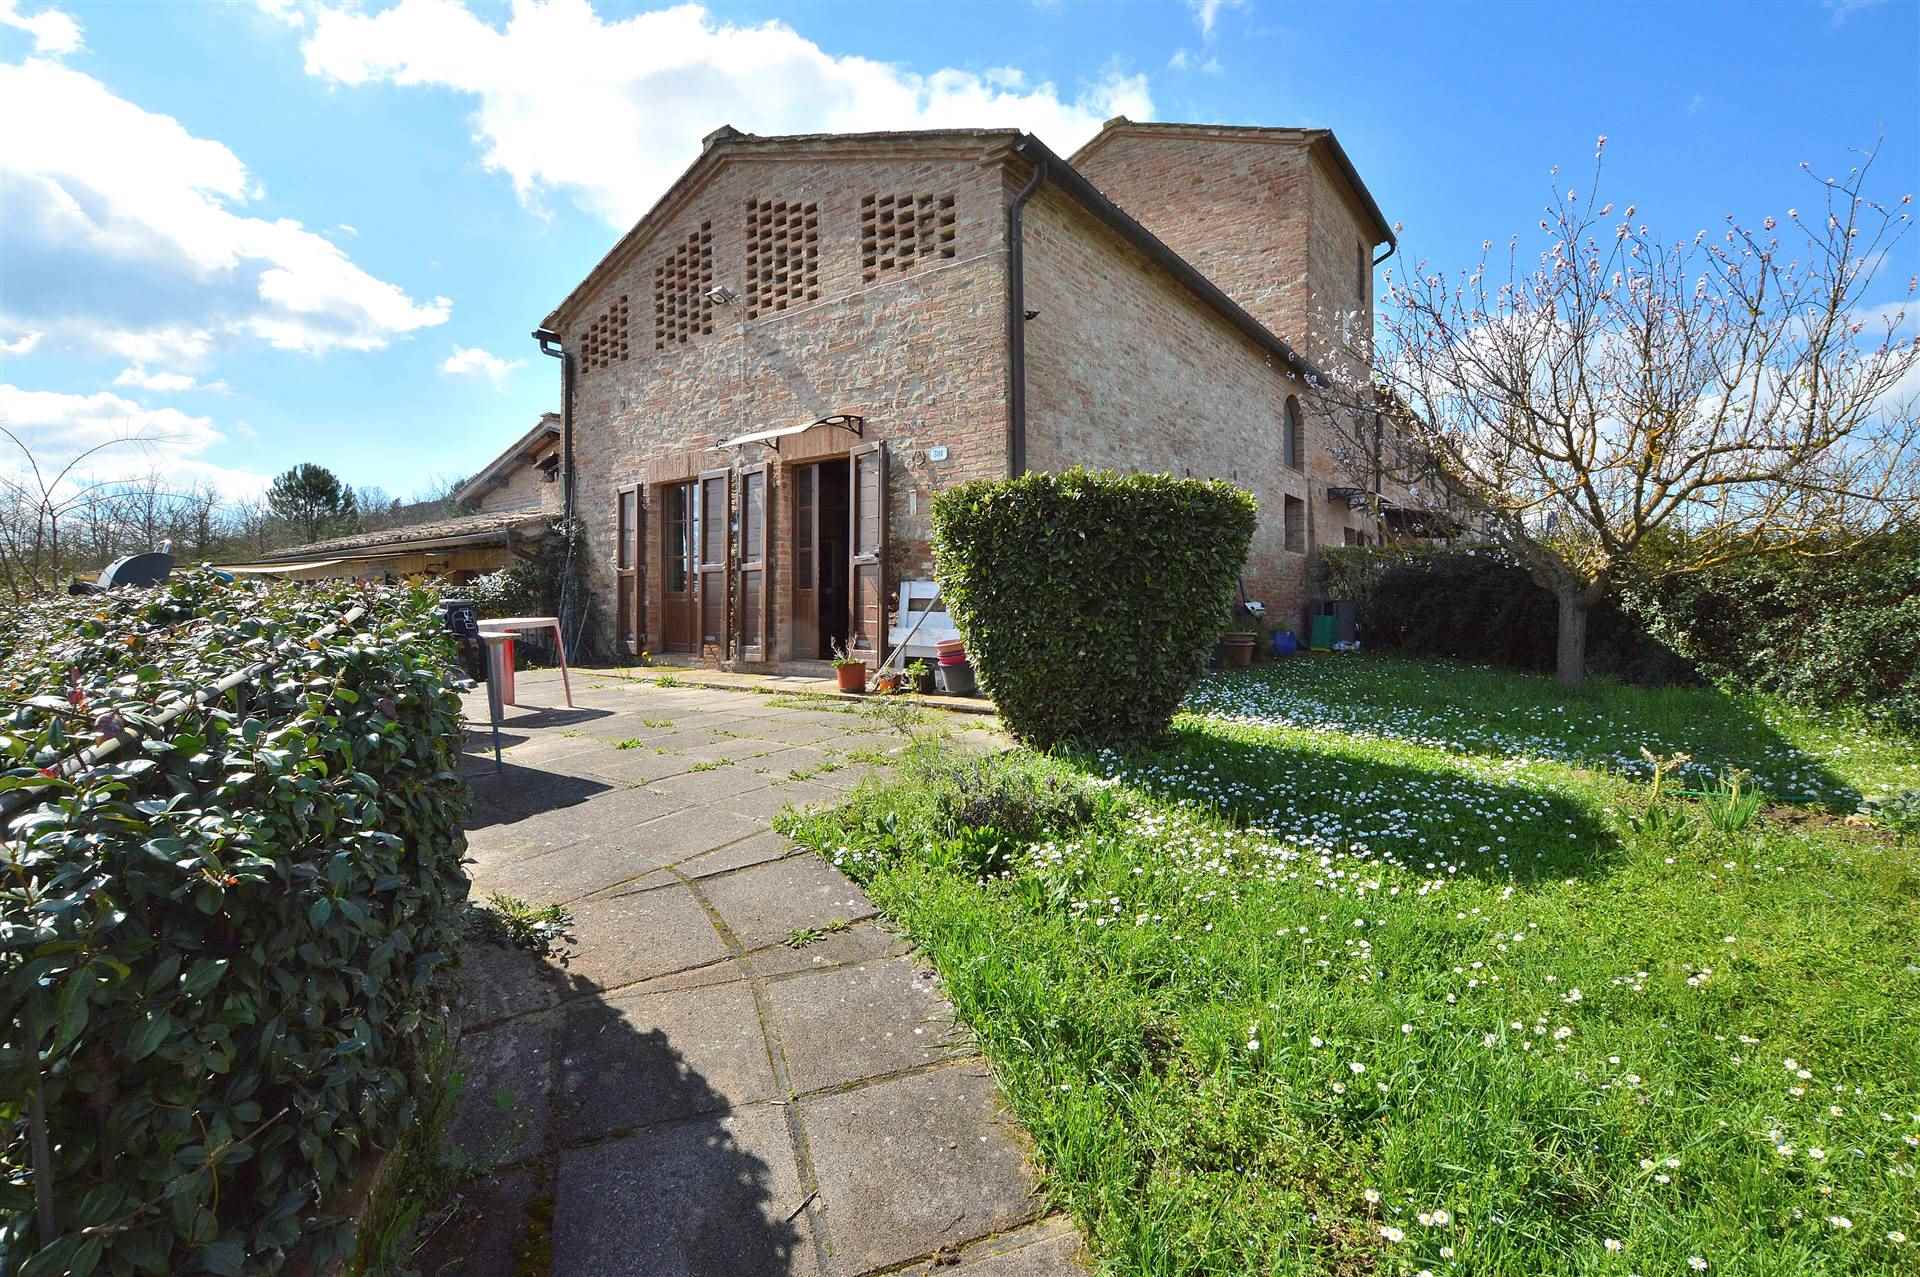 MONTERONI D'ARBIA, Apartment for sale of 108 Sq. mt., Excellent Condition, Heating Individual heating system, Energetic class: G, Epi: 175 kwh/m2 year, placed at Ground on 1, composed by: 6 Rooms, 